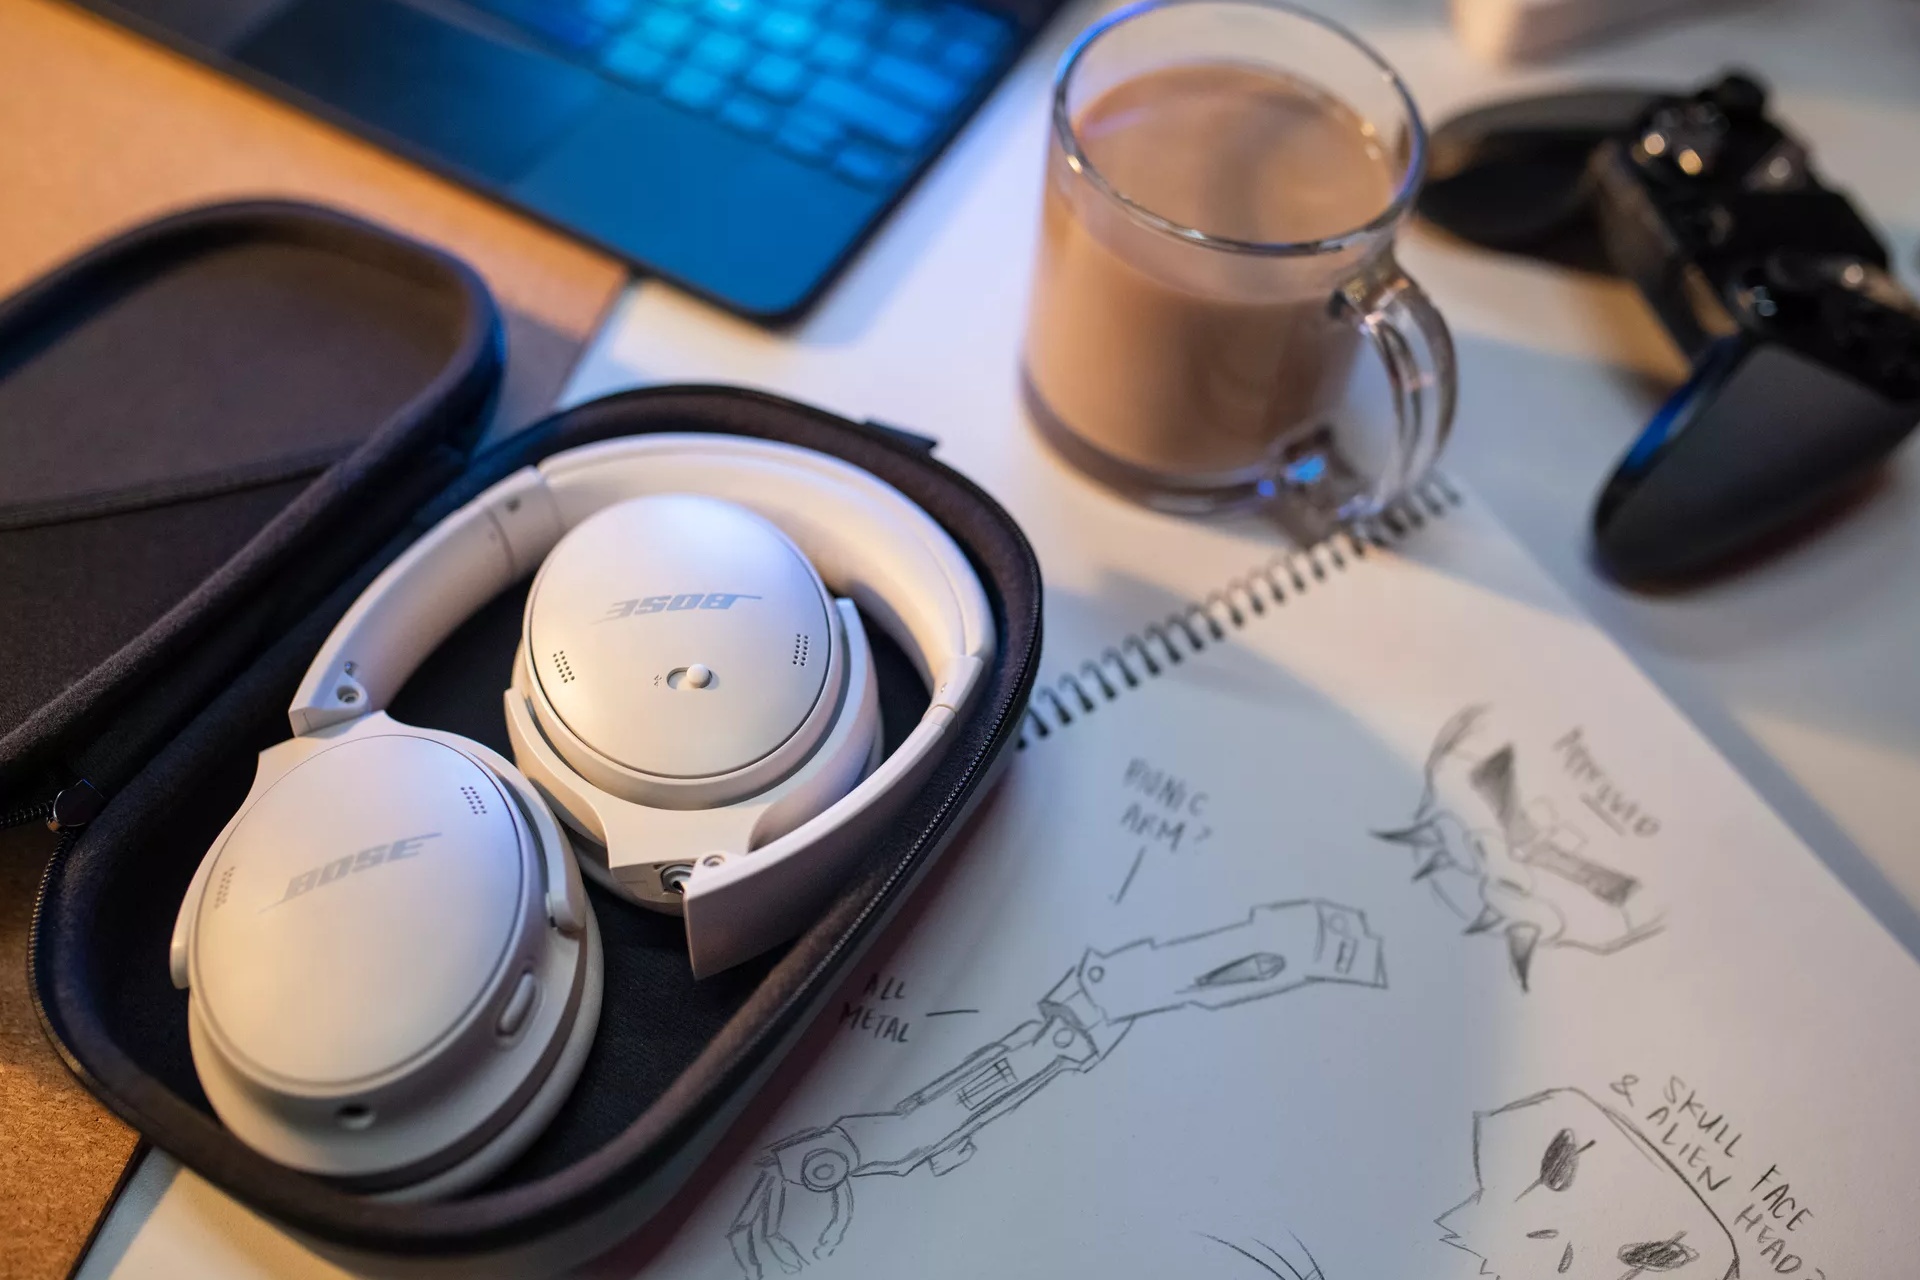 Bose QuietComfort 45 Headphones in their carry case on a desk